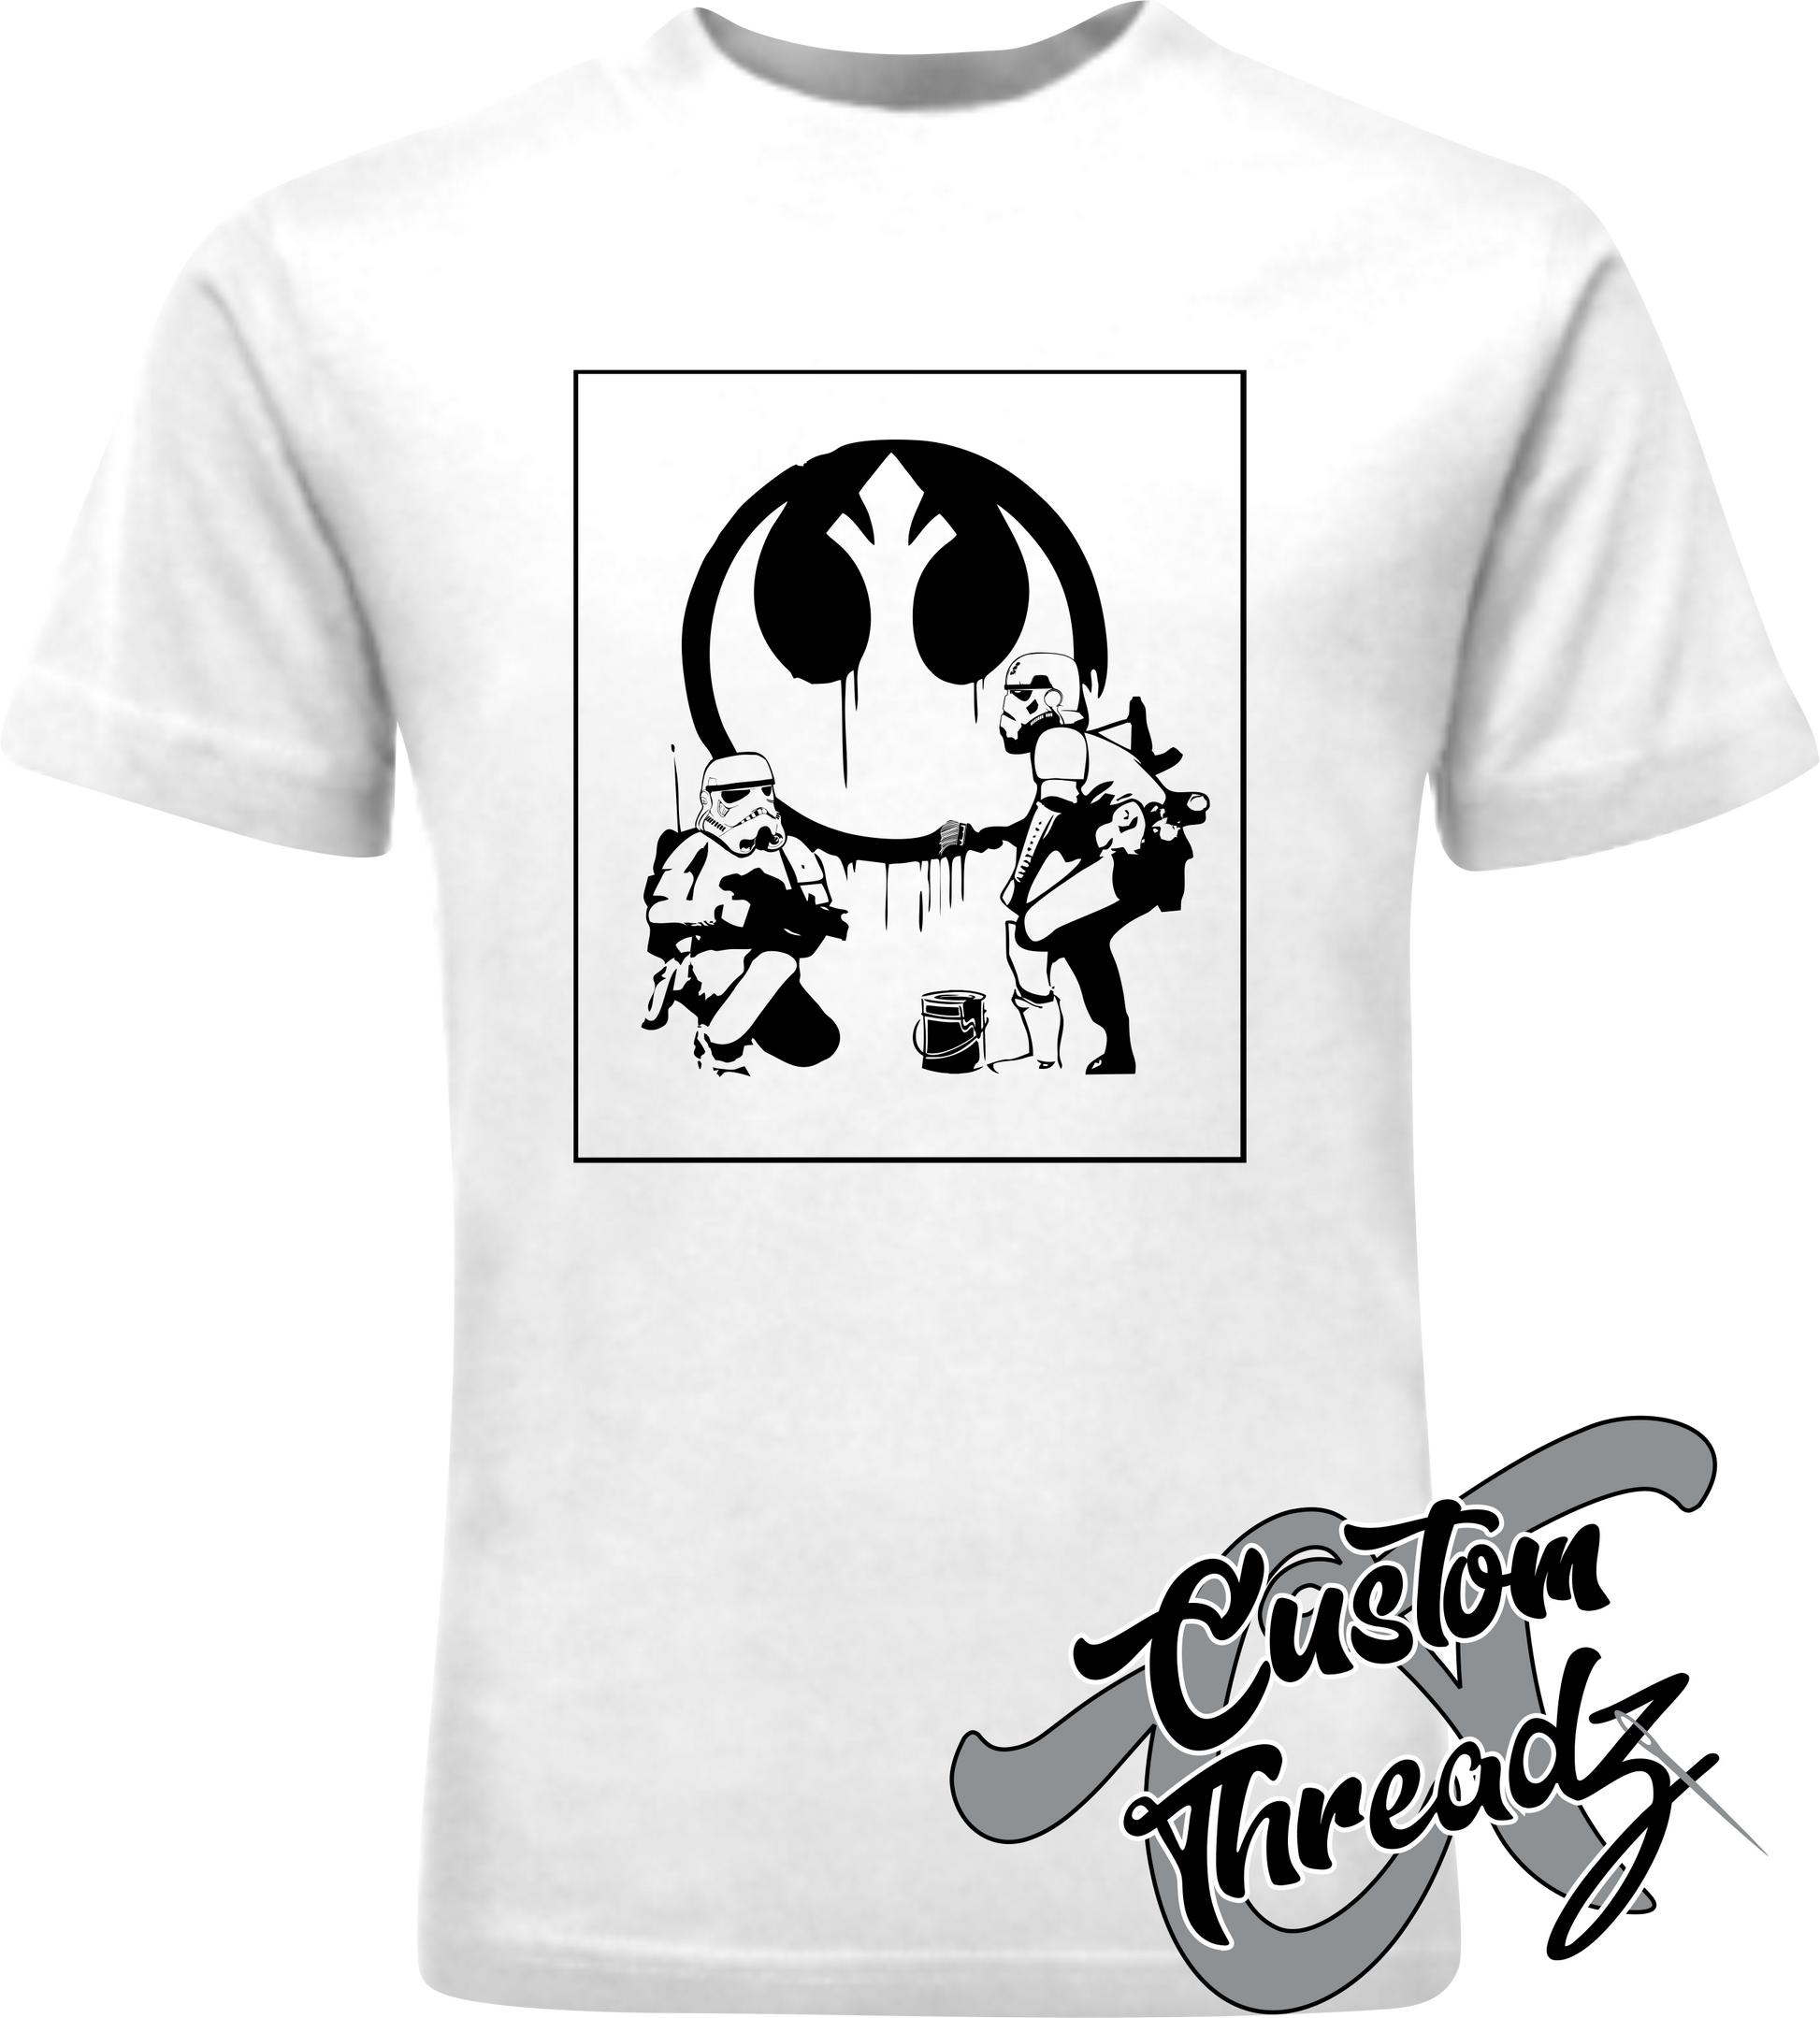 white tee with rebel alliance star wars stormtroopers DTG printed design